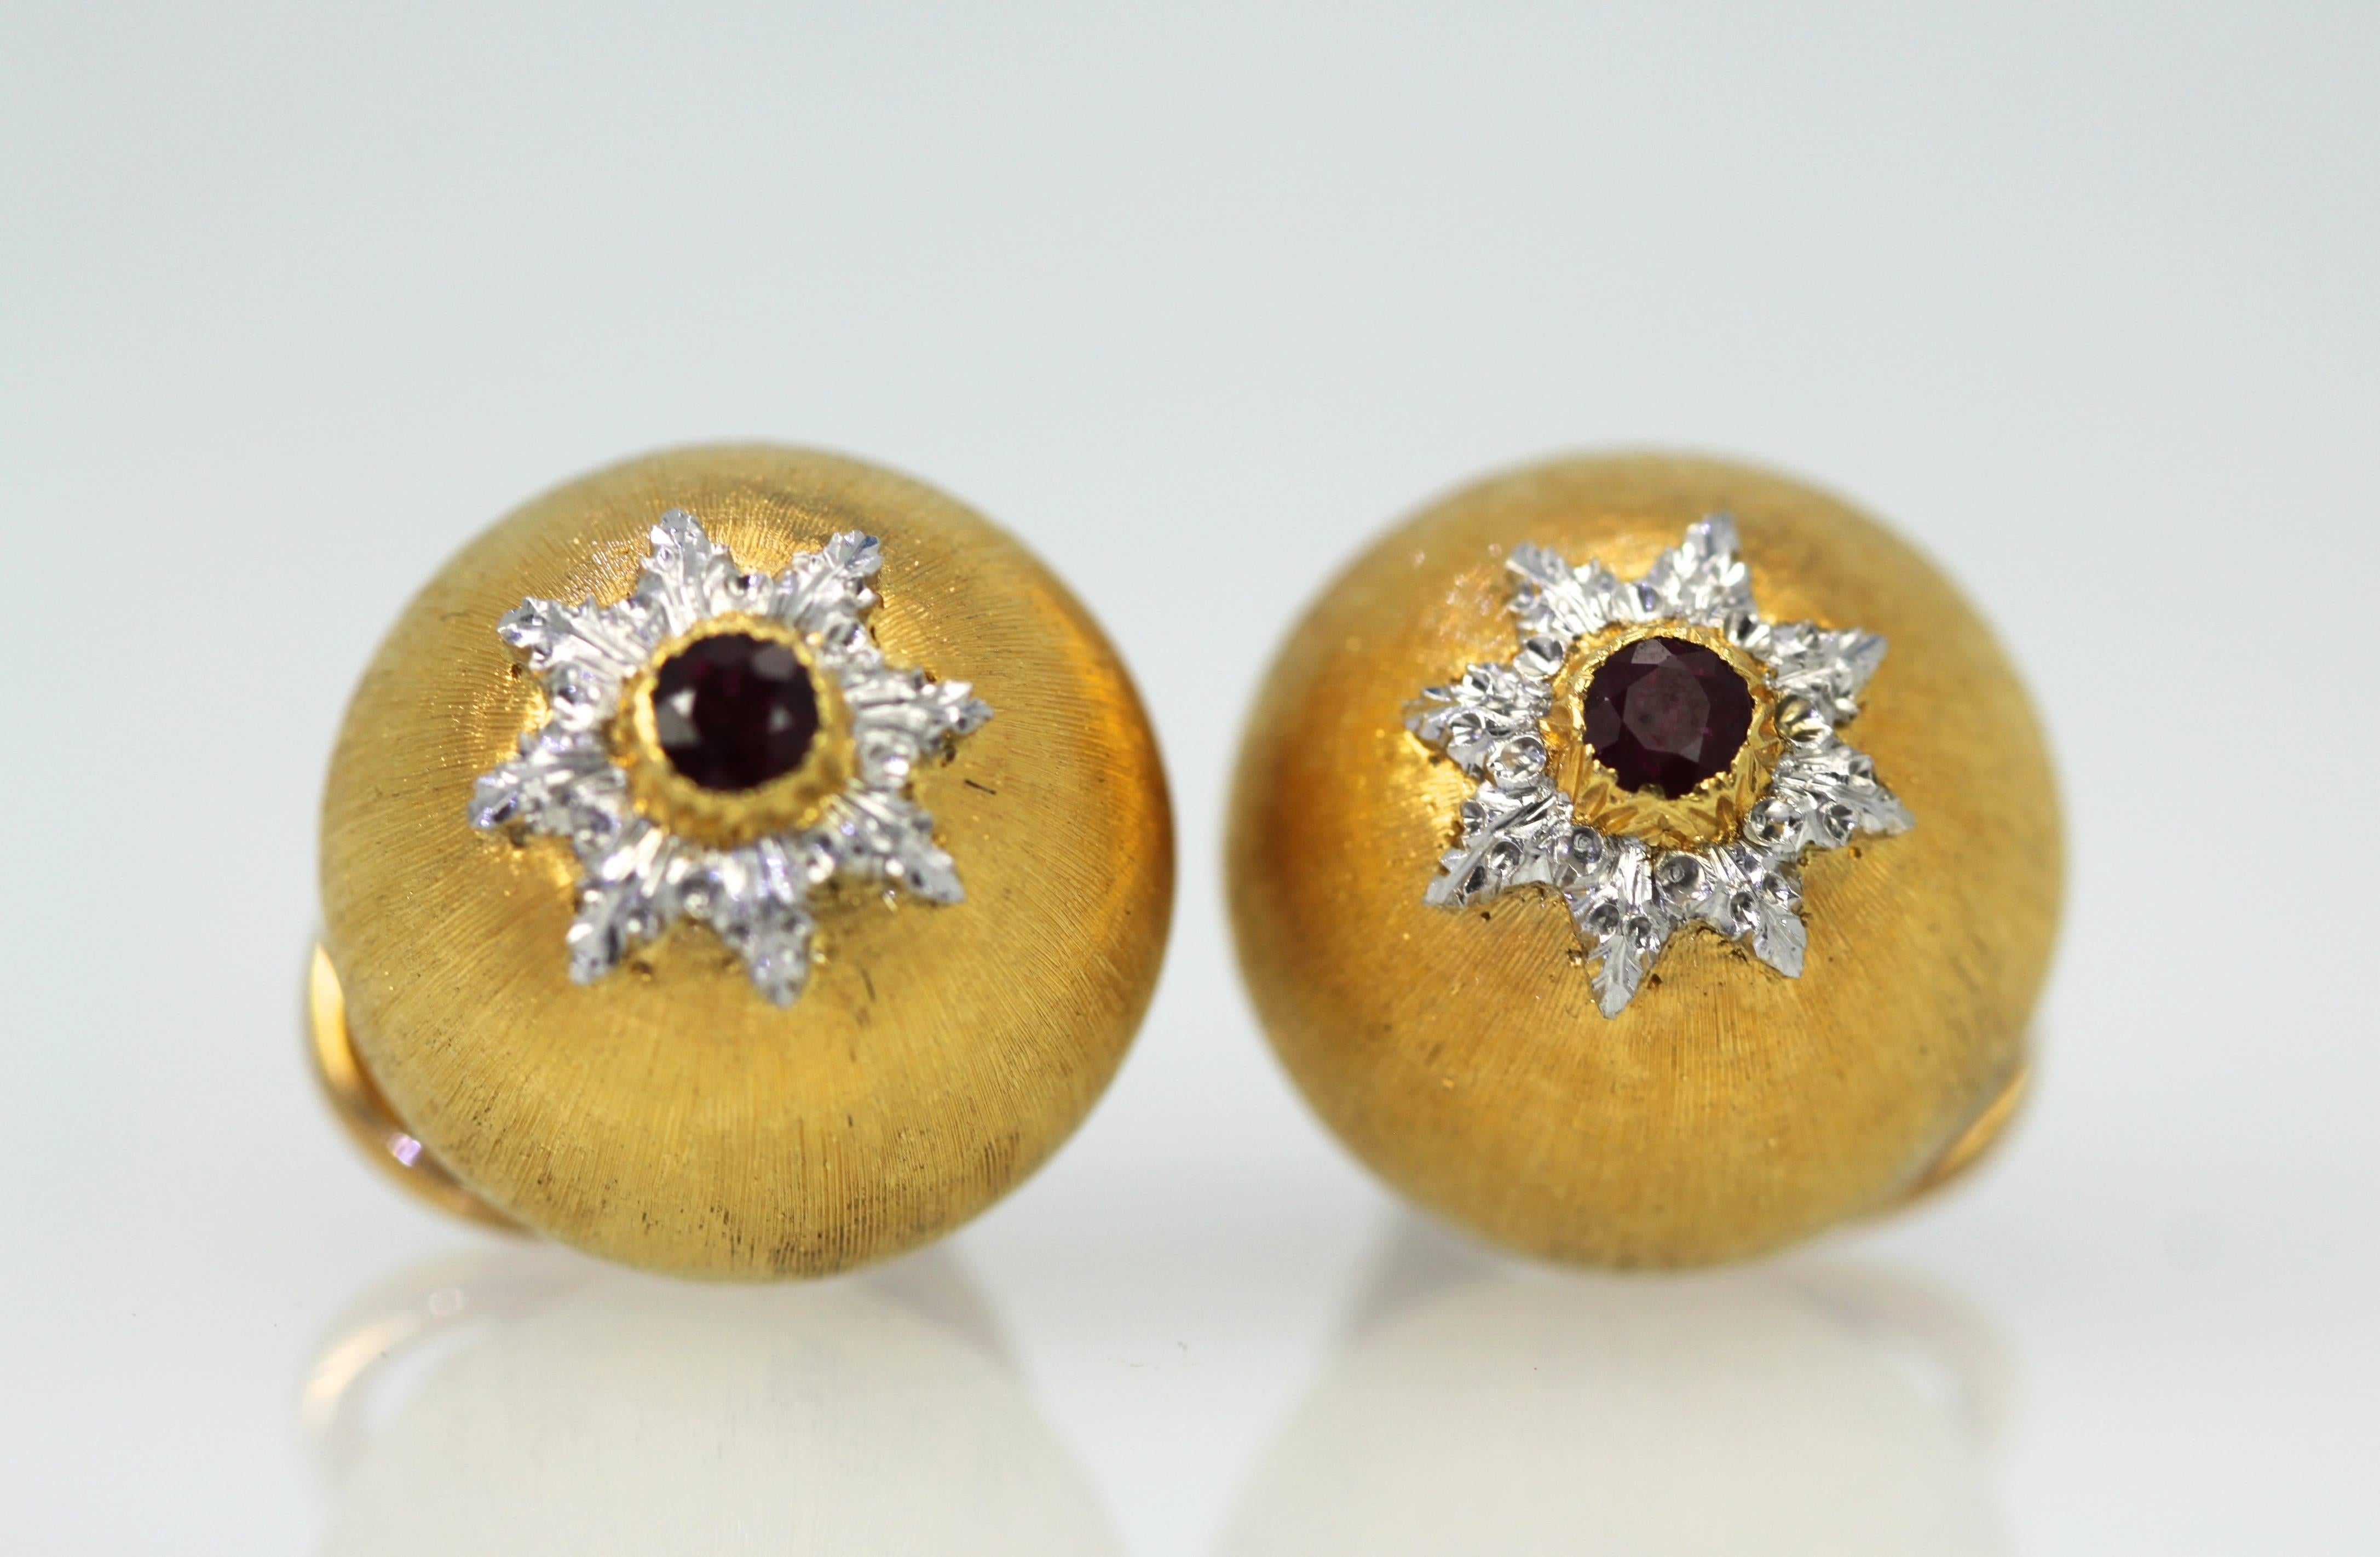 Like new are these Buccellati Round Bombe Earrings.  These earrings are small and round with a Platinum floral center studded with a lush red ruby center. 

Metal: 18K Yellow Gold w/ Platinum Center
Weight: 13.5 Grams
Stones: Rubies (2) 0.02